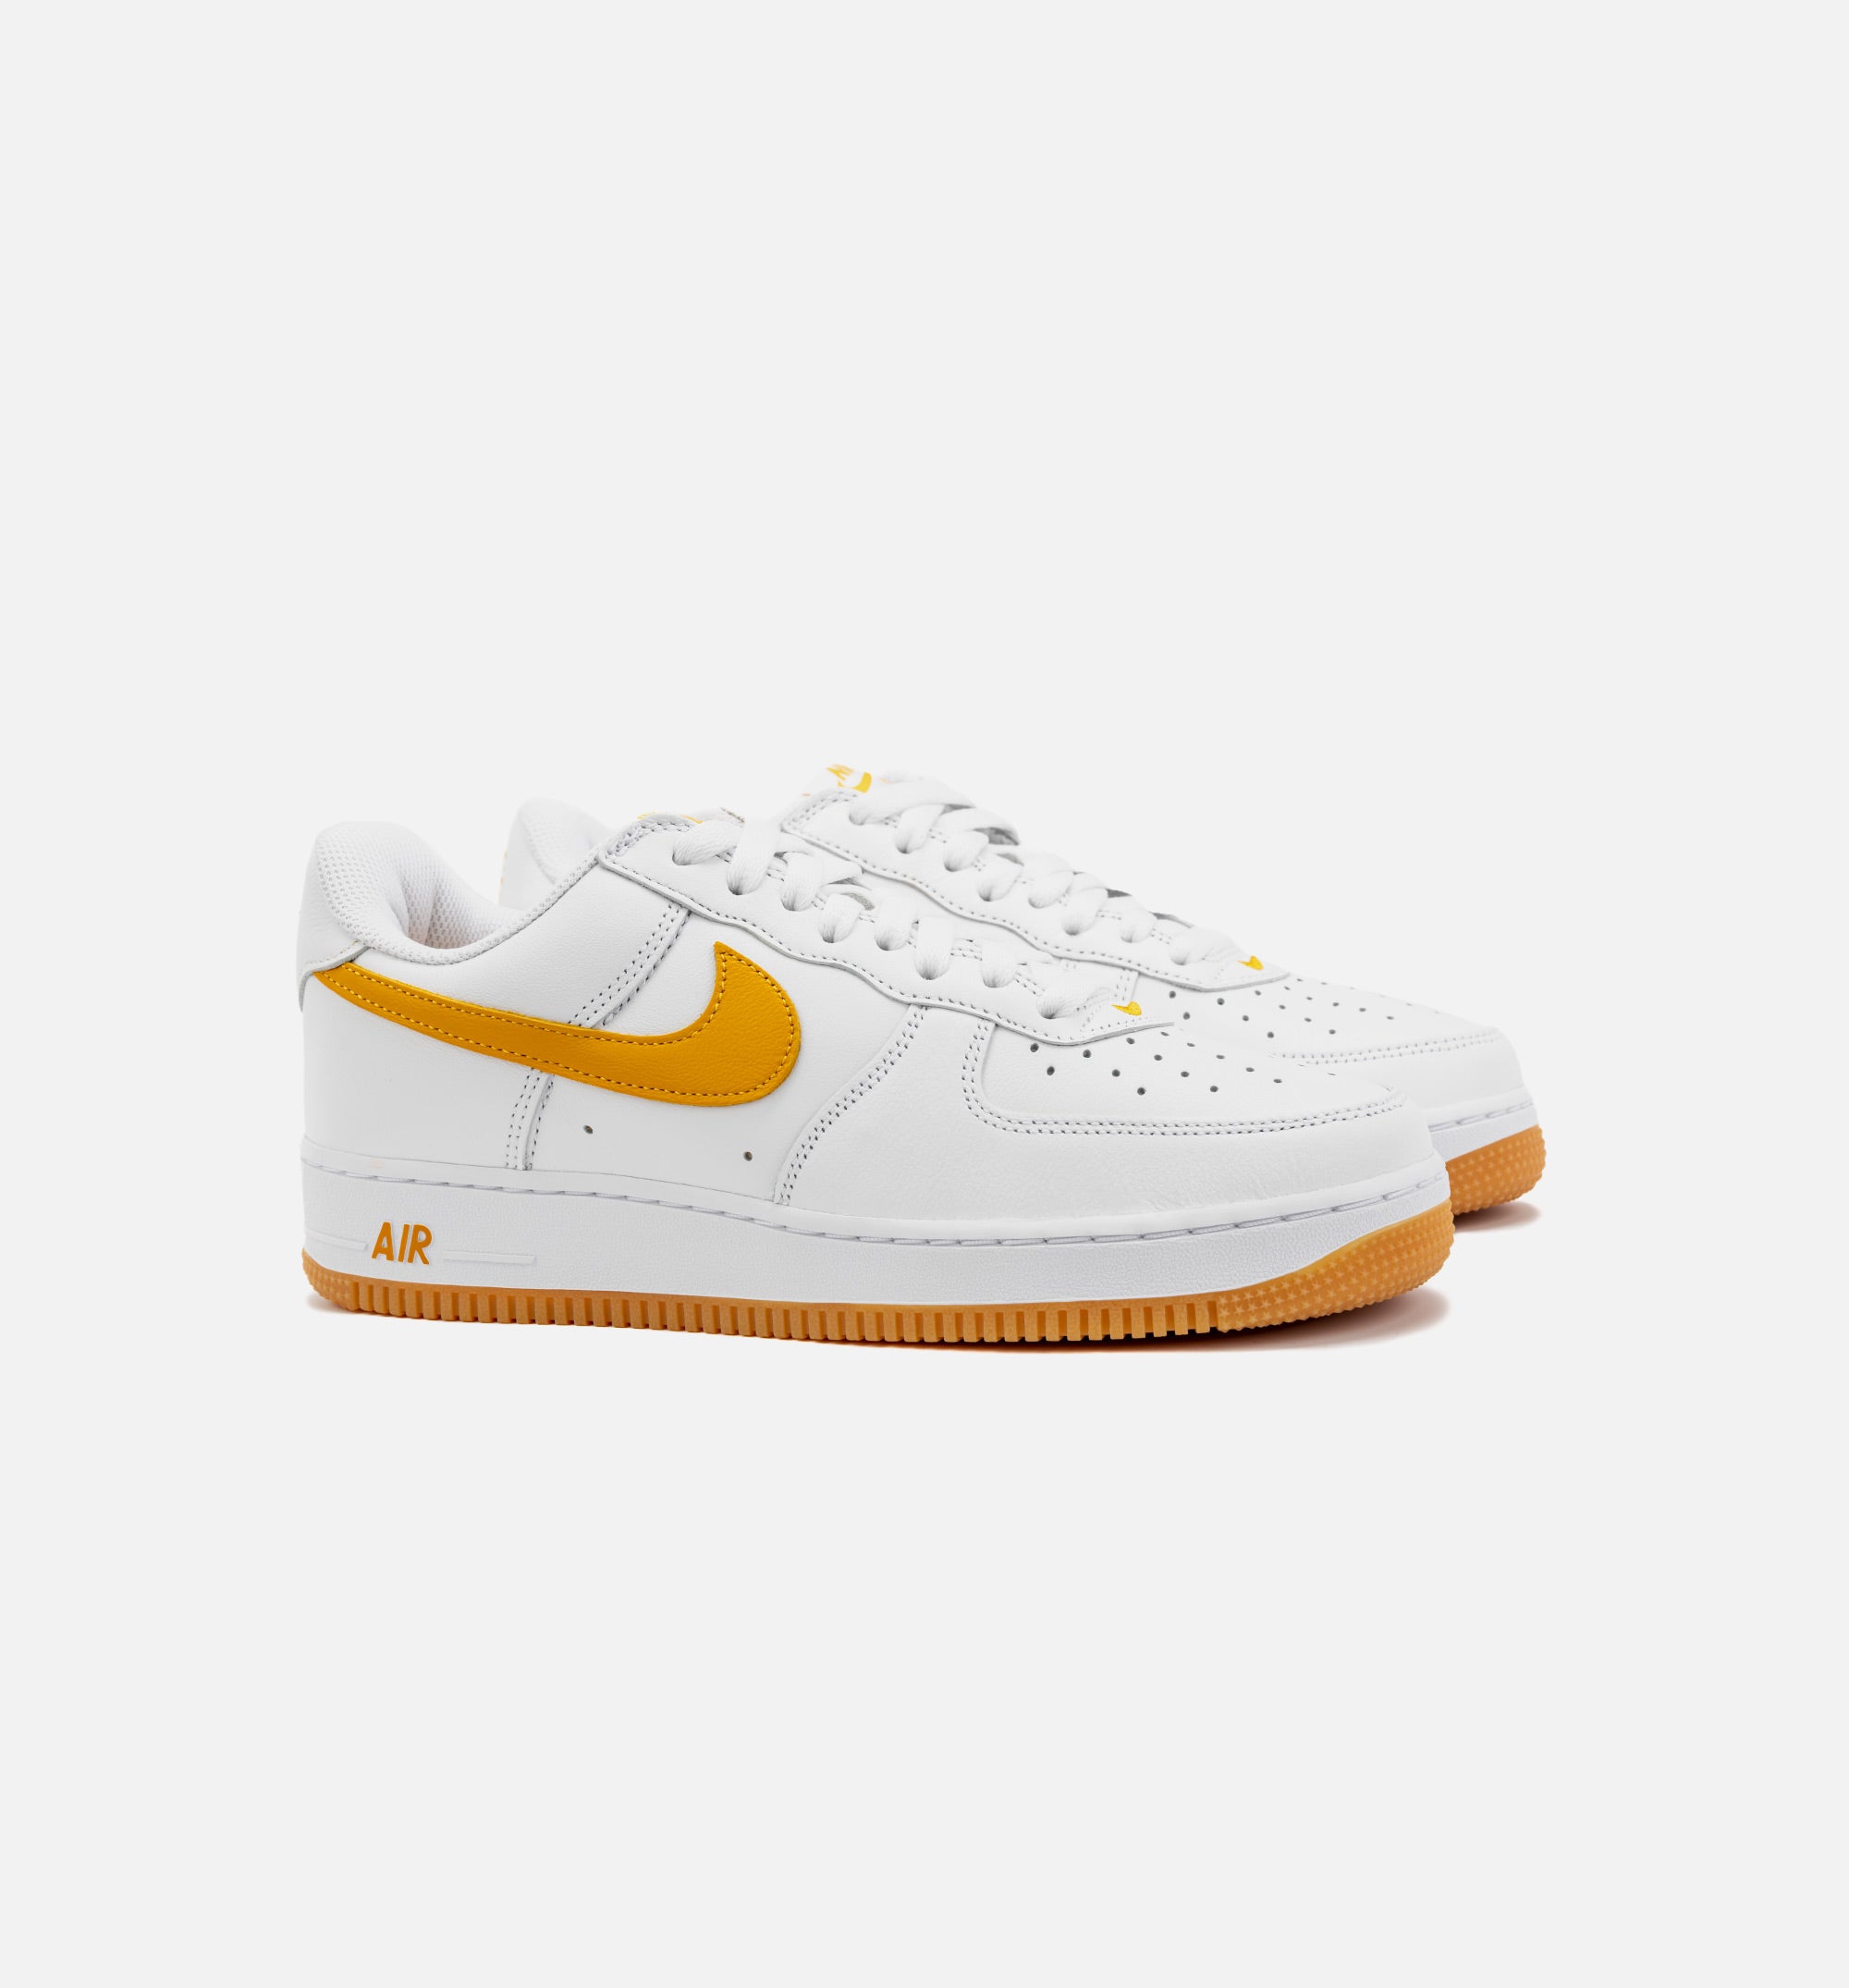 Nike Air Force 1 Low 82 Double Swoosh Yellow Shoes Sneakers